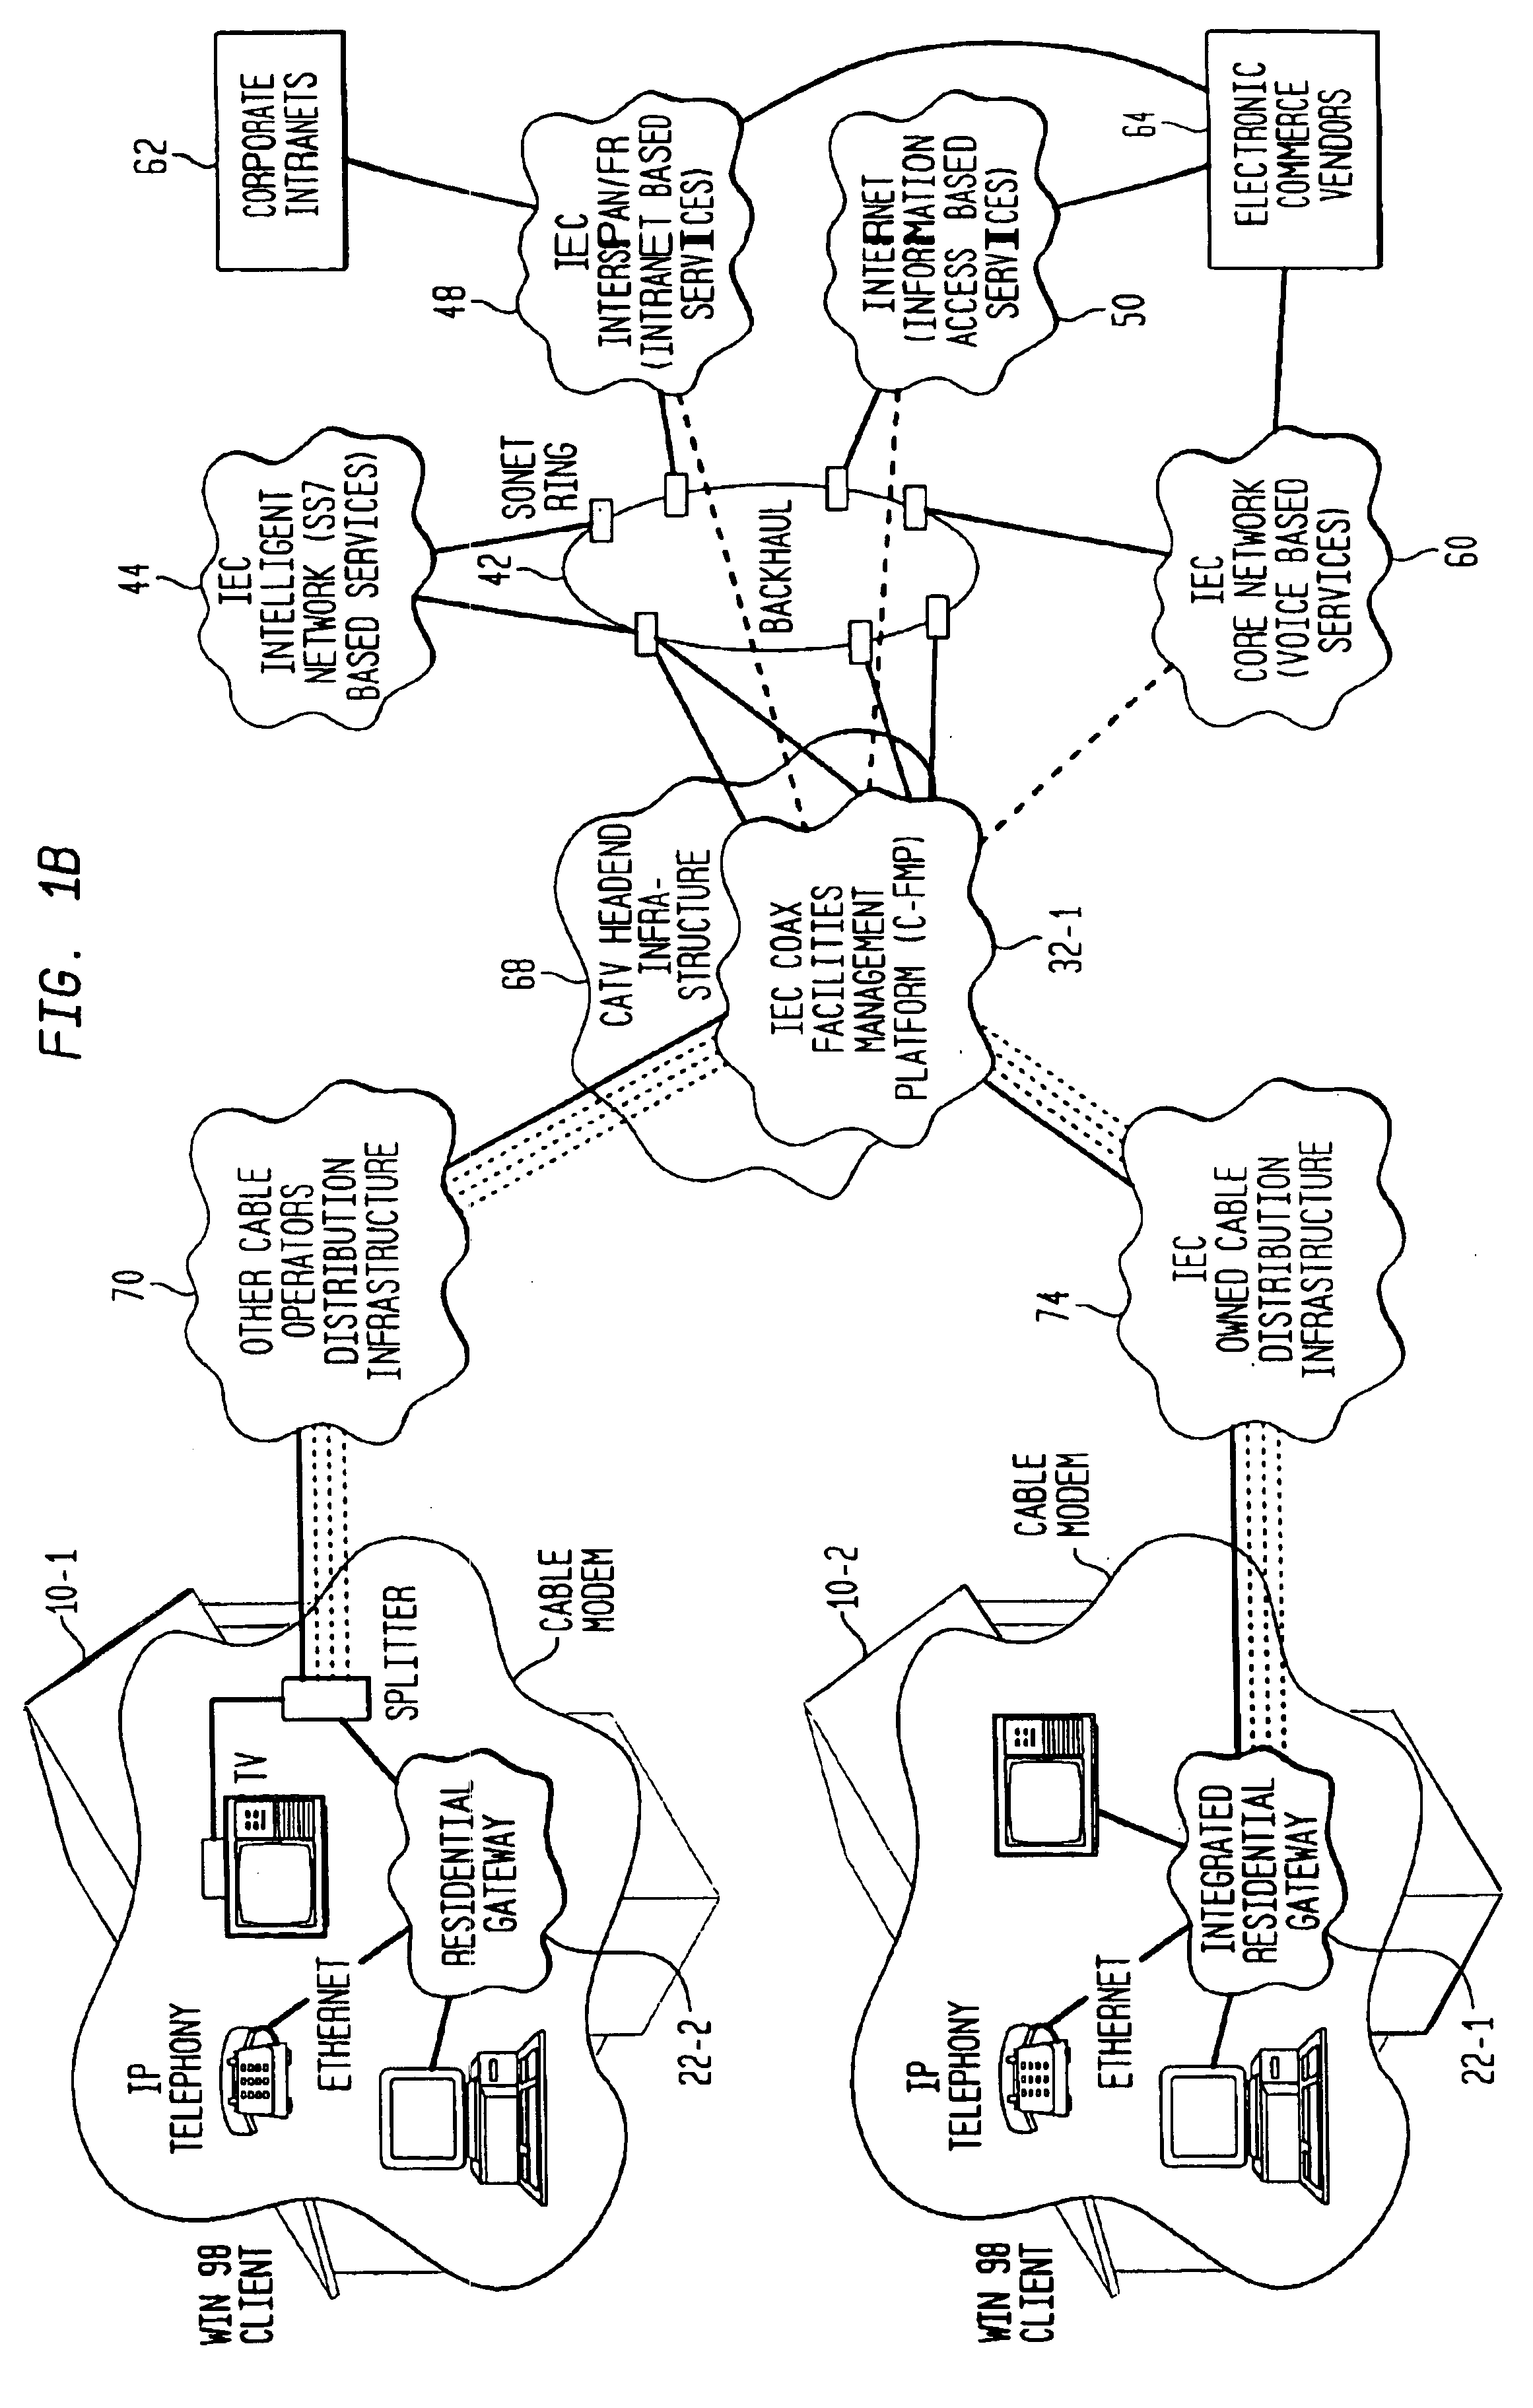 Network server platform (NSP) for a hybrid coaxial/twisted pair local loop network service architecture